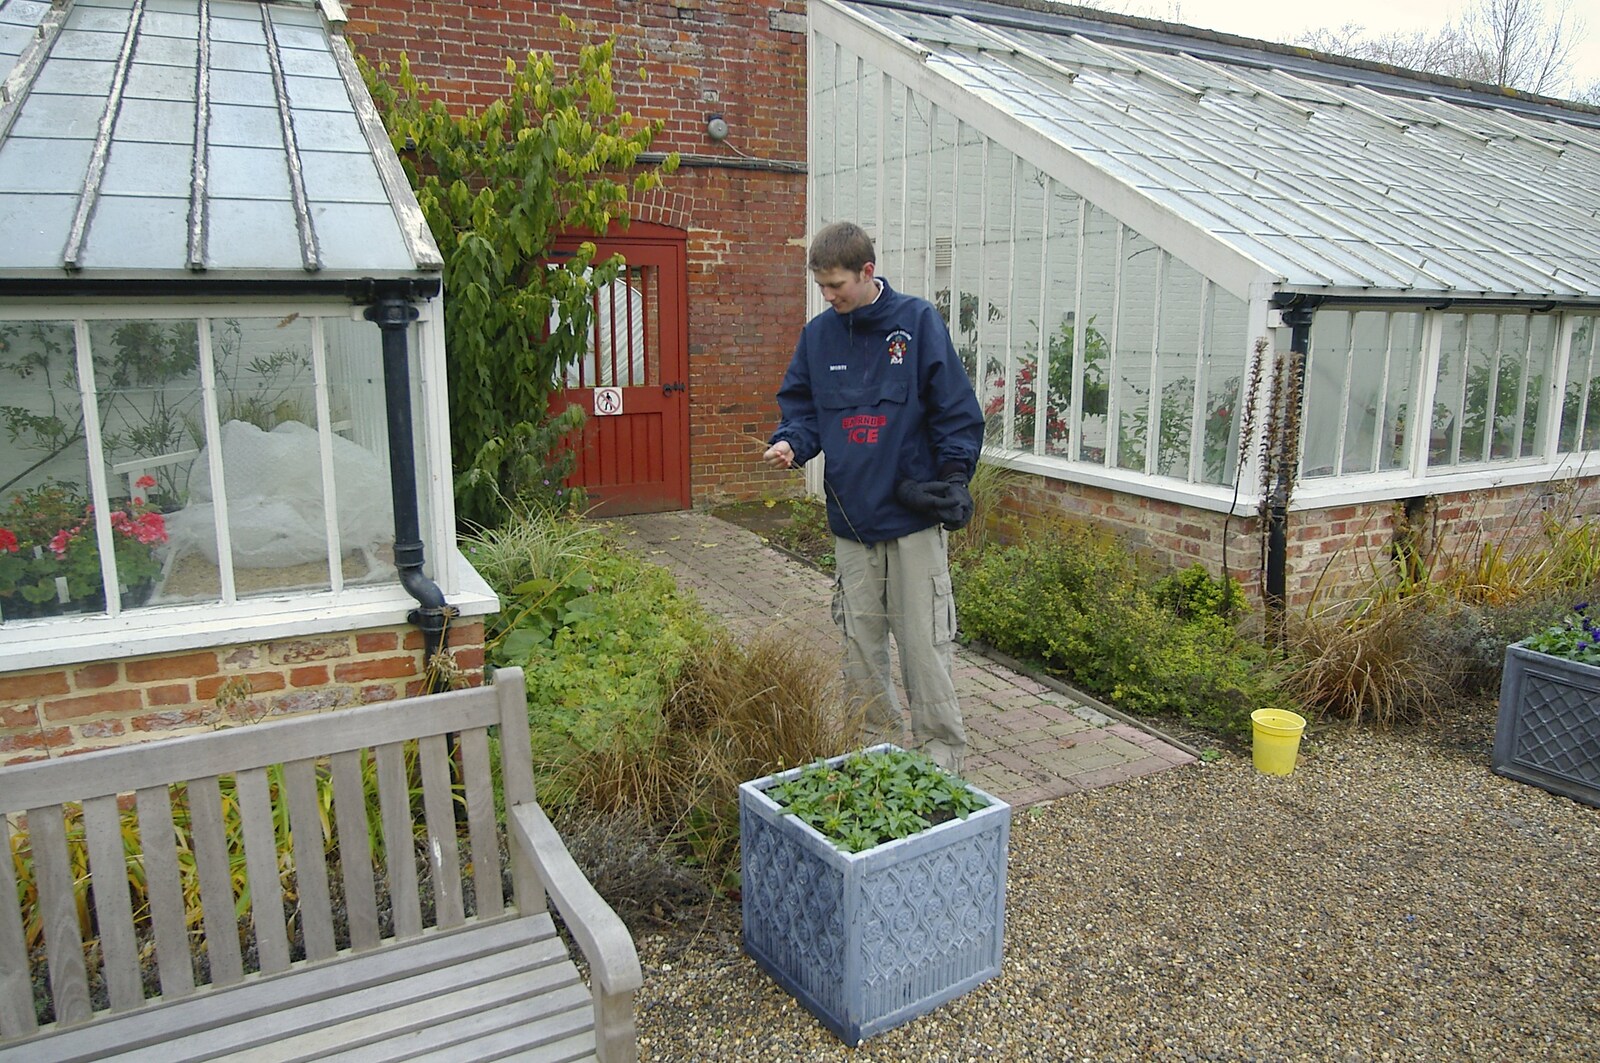 Phil examines a grassy plant from Thornham Walled Garden, and Bob Last Leaves the Lab, Cambridge - 20th November 2005